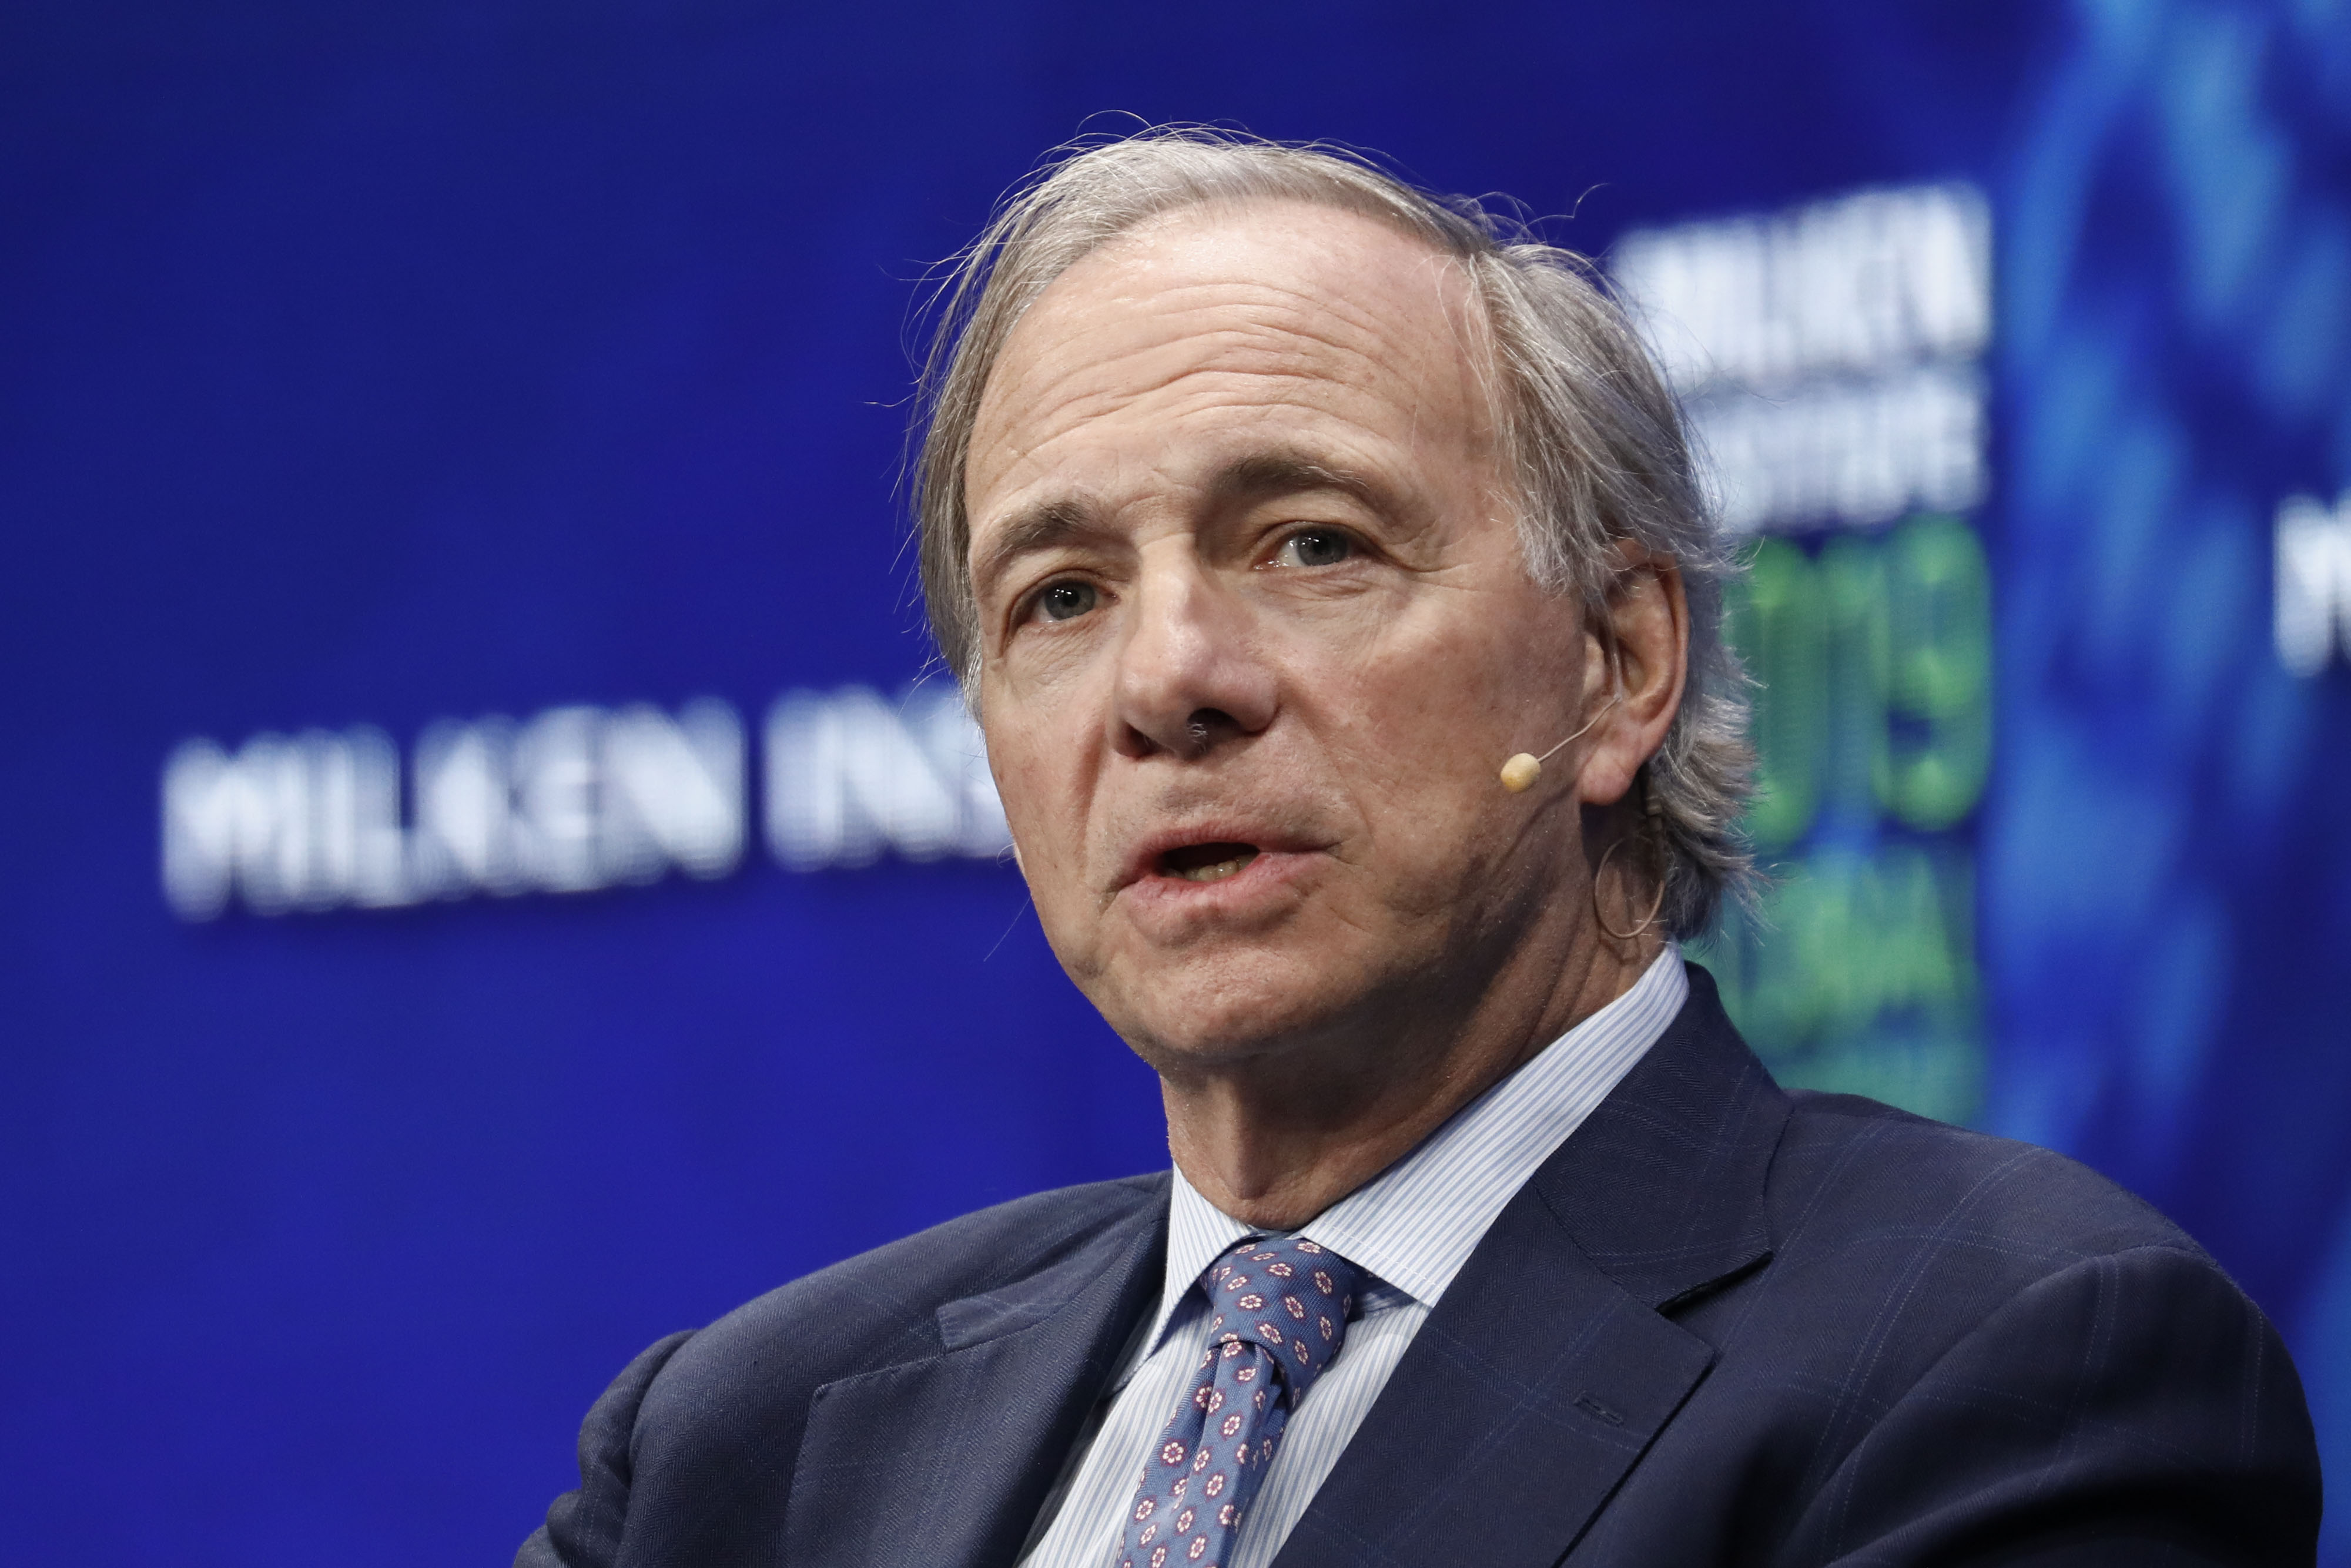 Dalio Sued Over 'Enormous Addition' to SoHo Penthouse Rooftop - Bloomberg